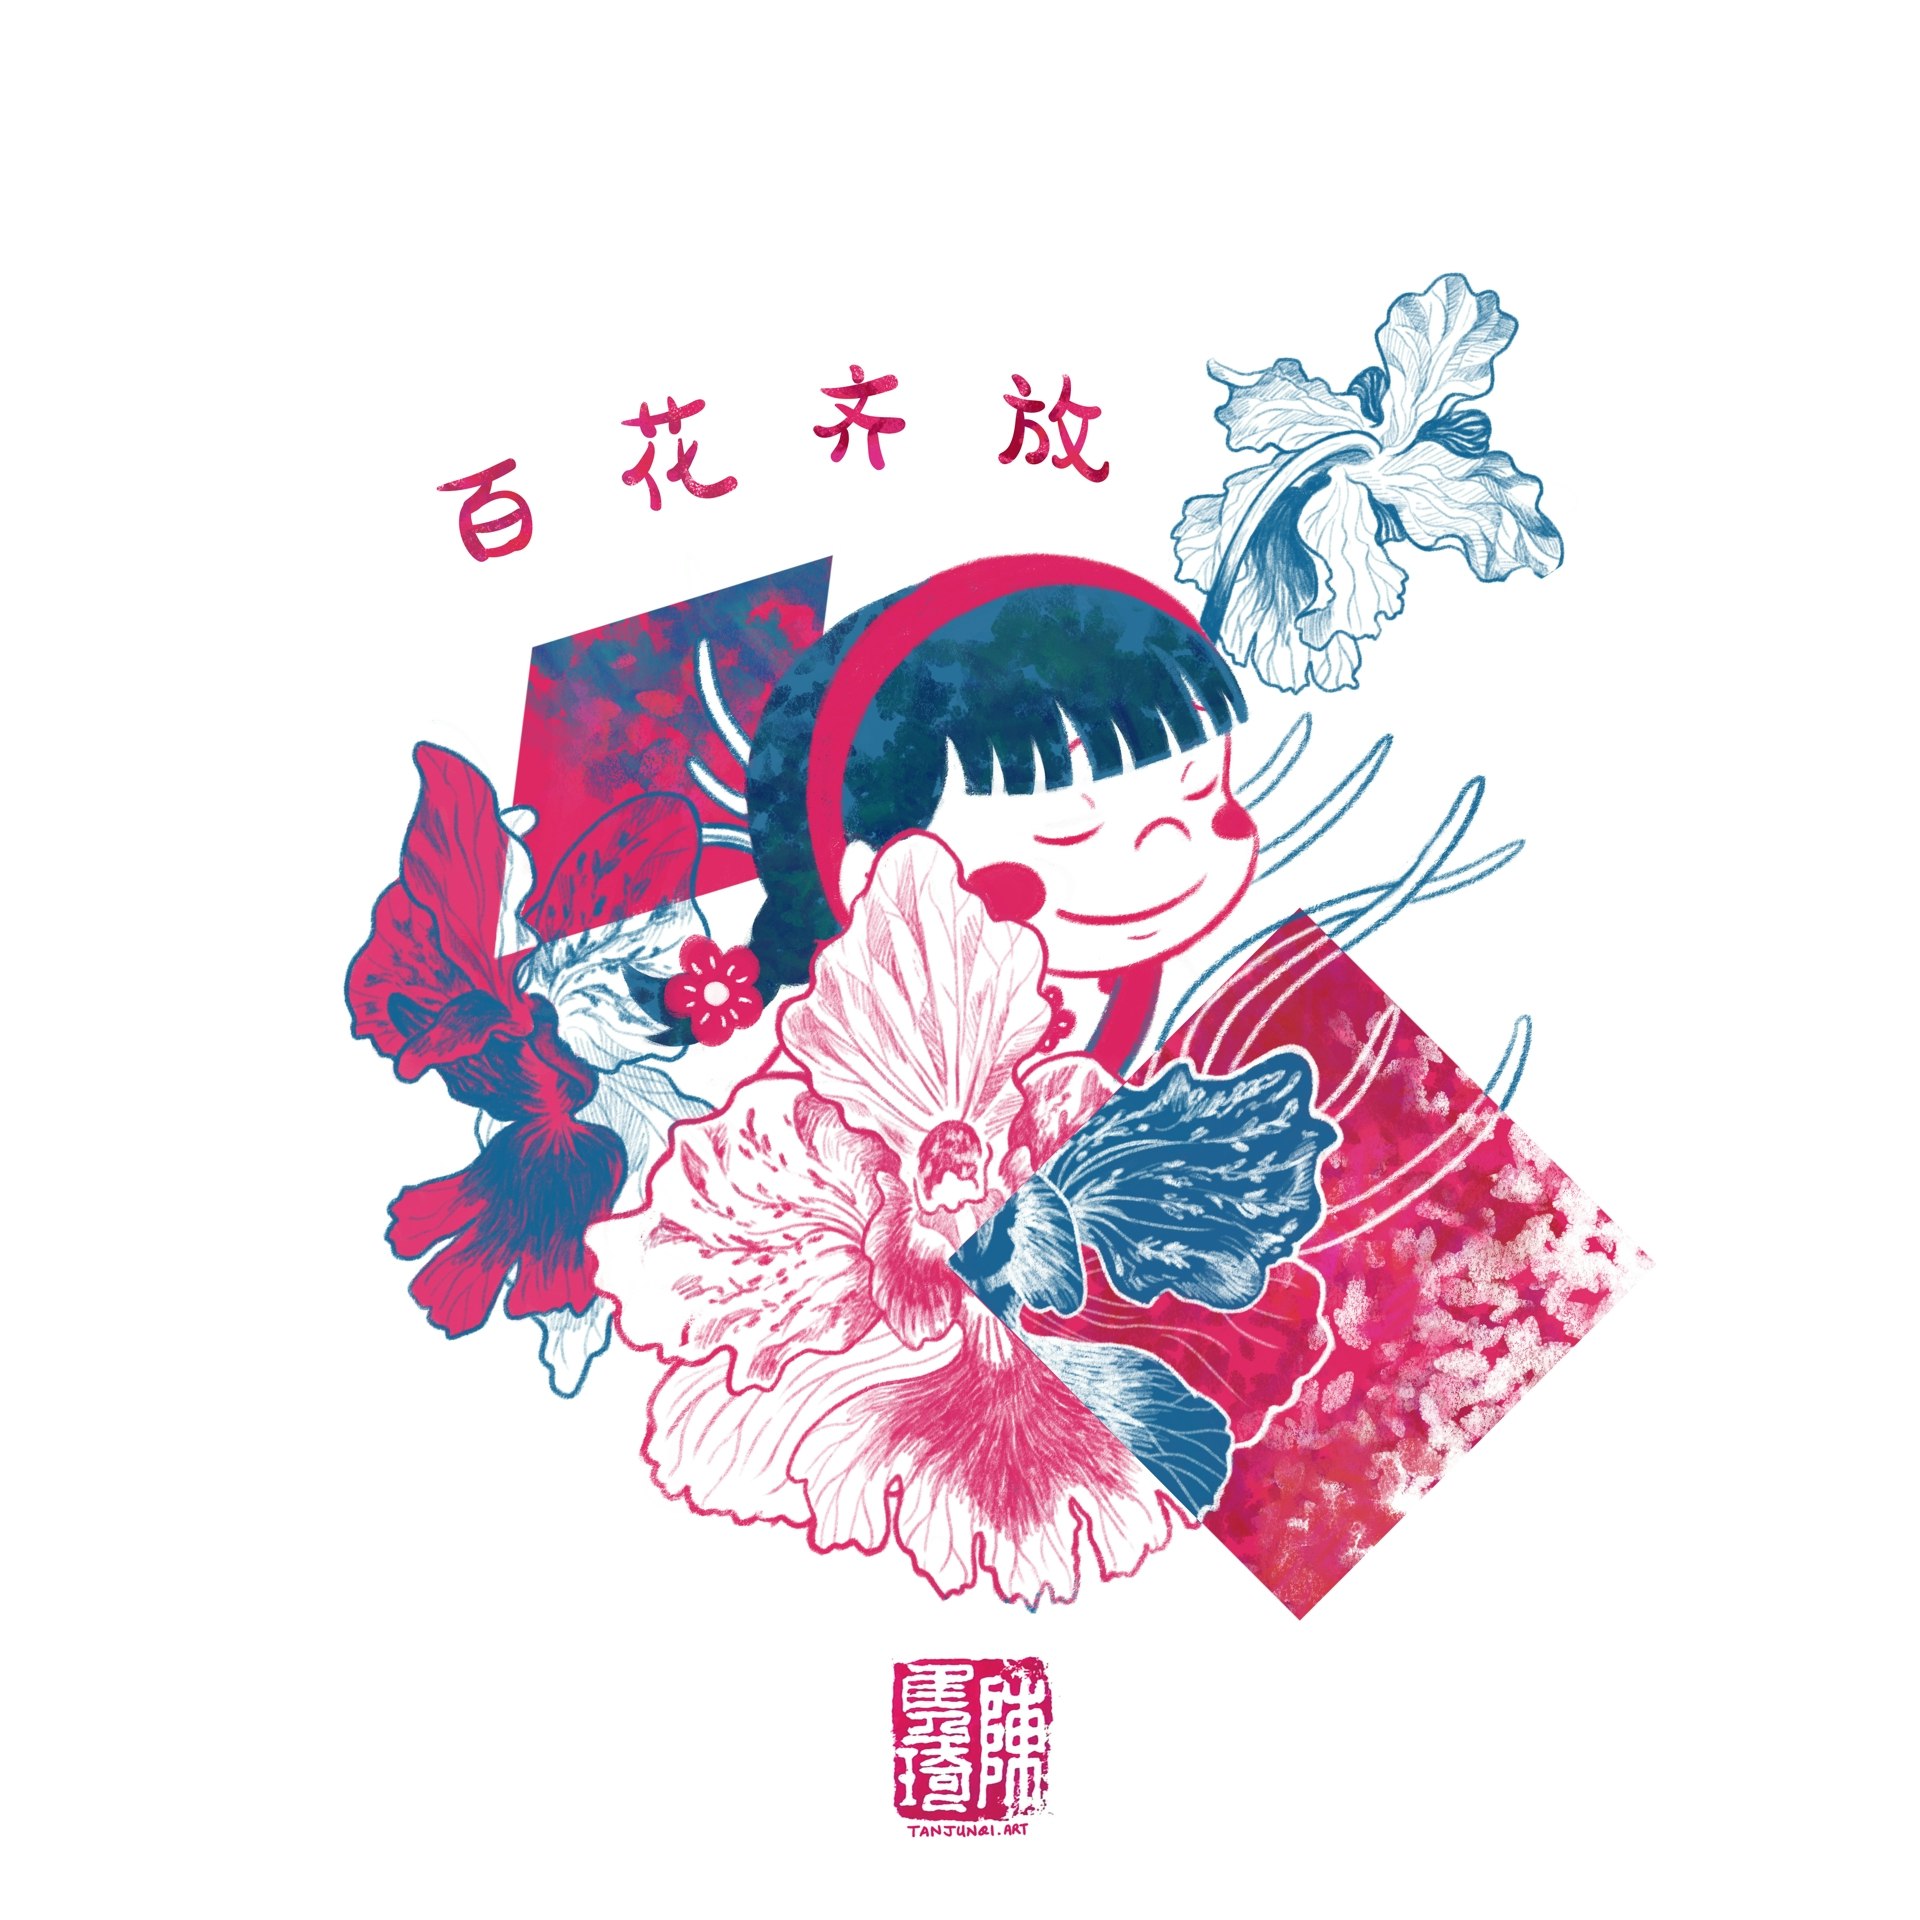 Digital painting of Shan Shan emerging from a cluster or orchid blooms, again in a fuschia and dark blue theme. The auspicious Chinese phrase: A hundred flowers blooming in unison frames the top of the design.